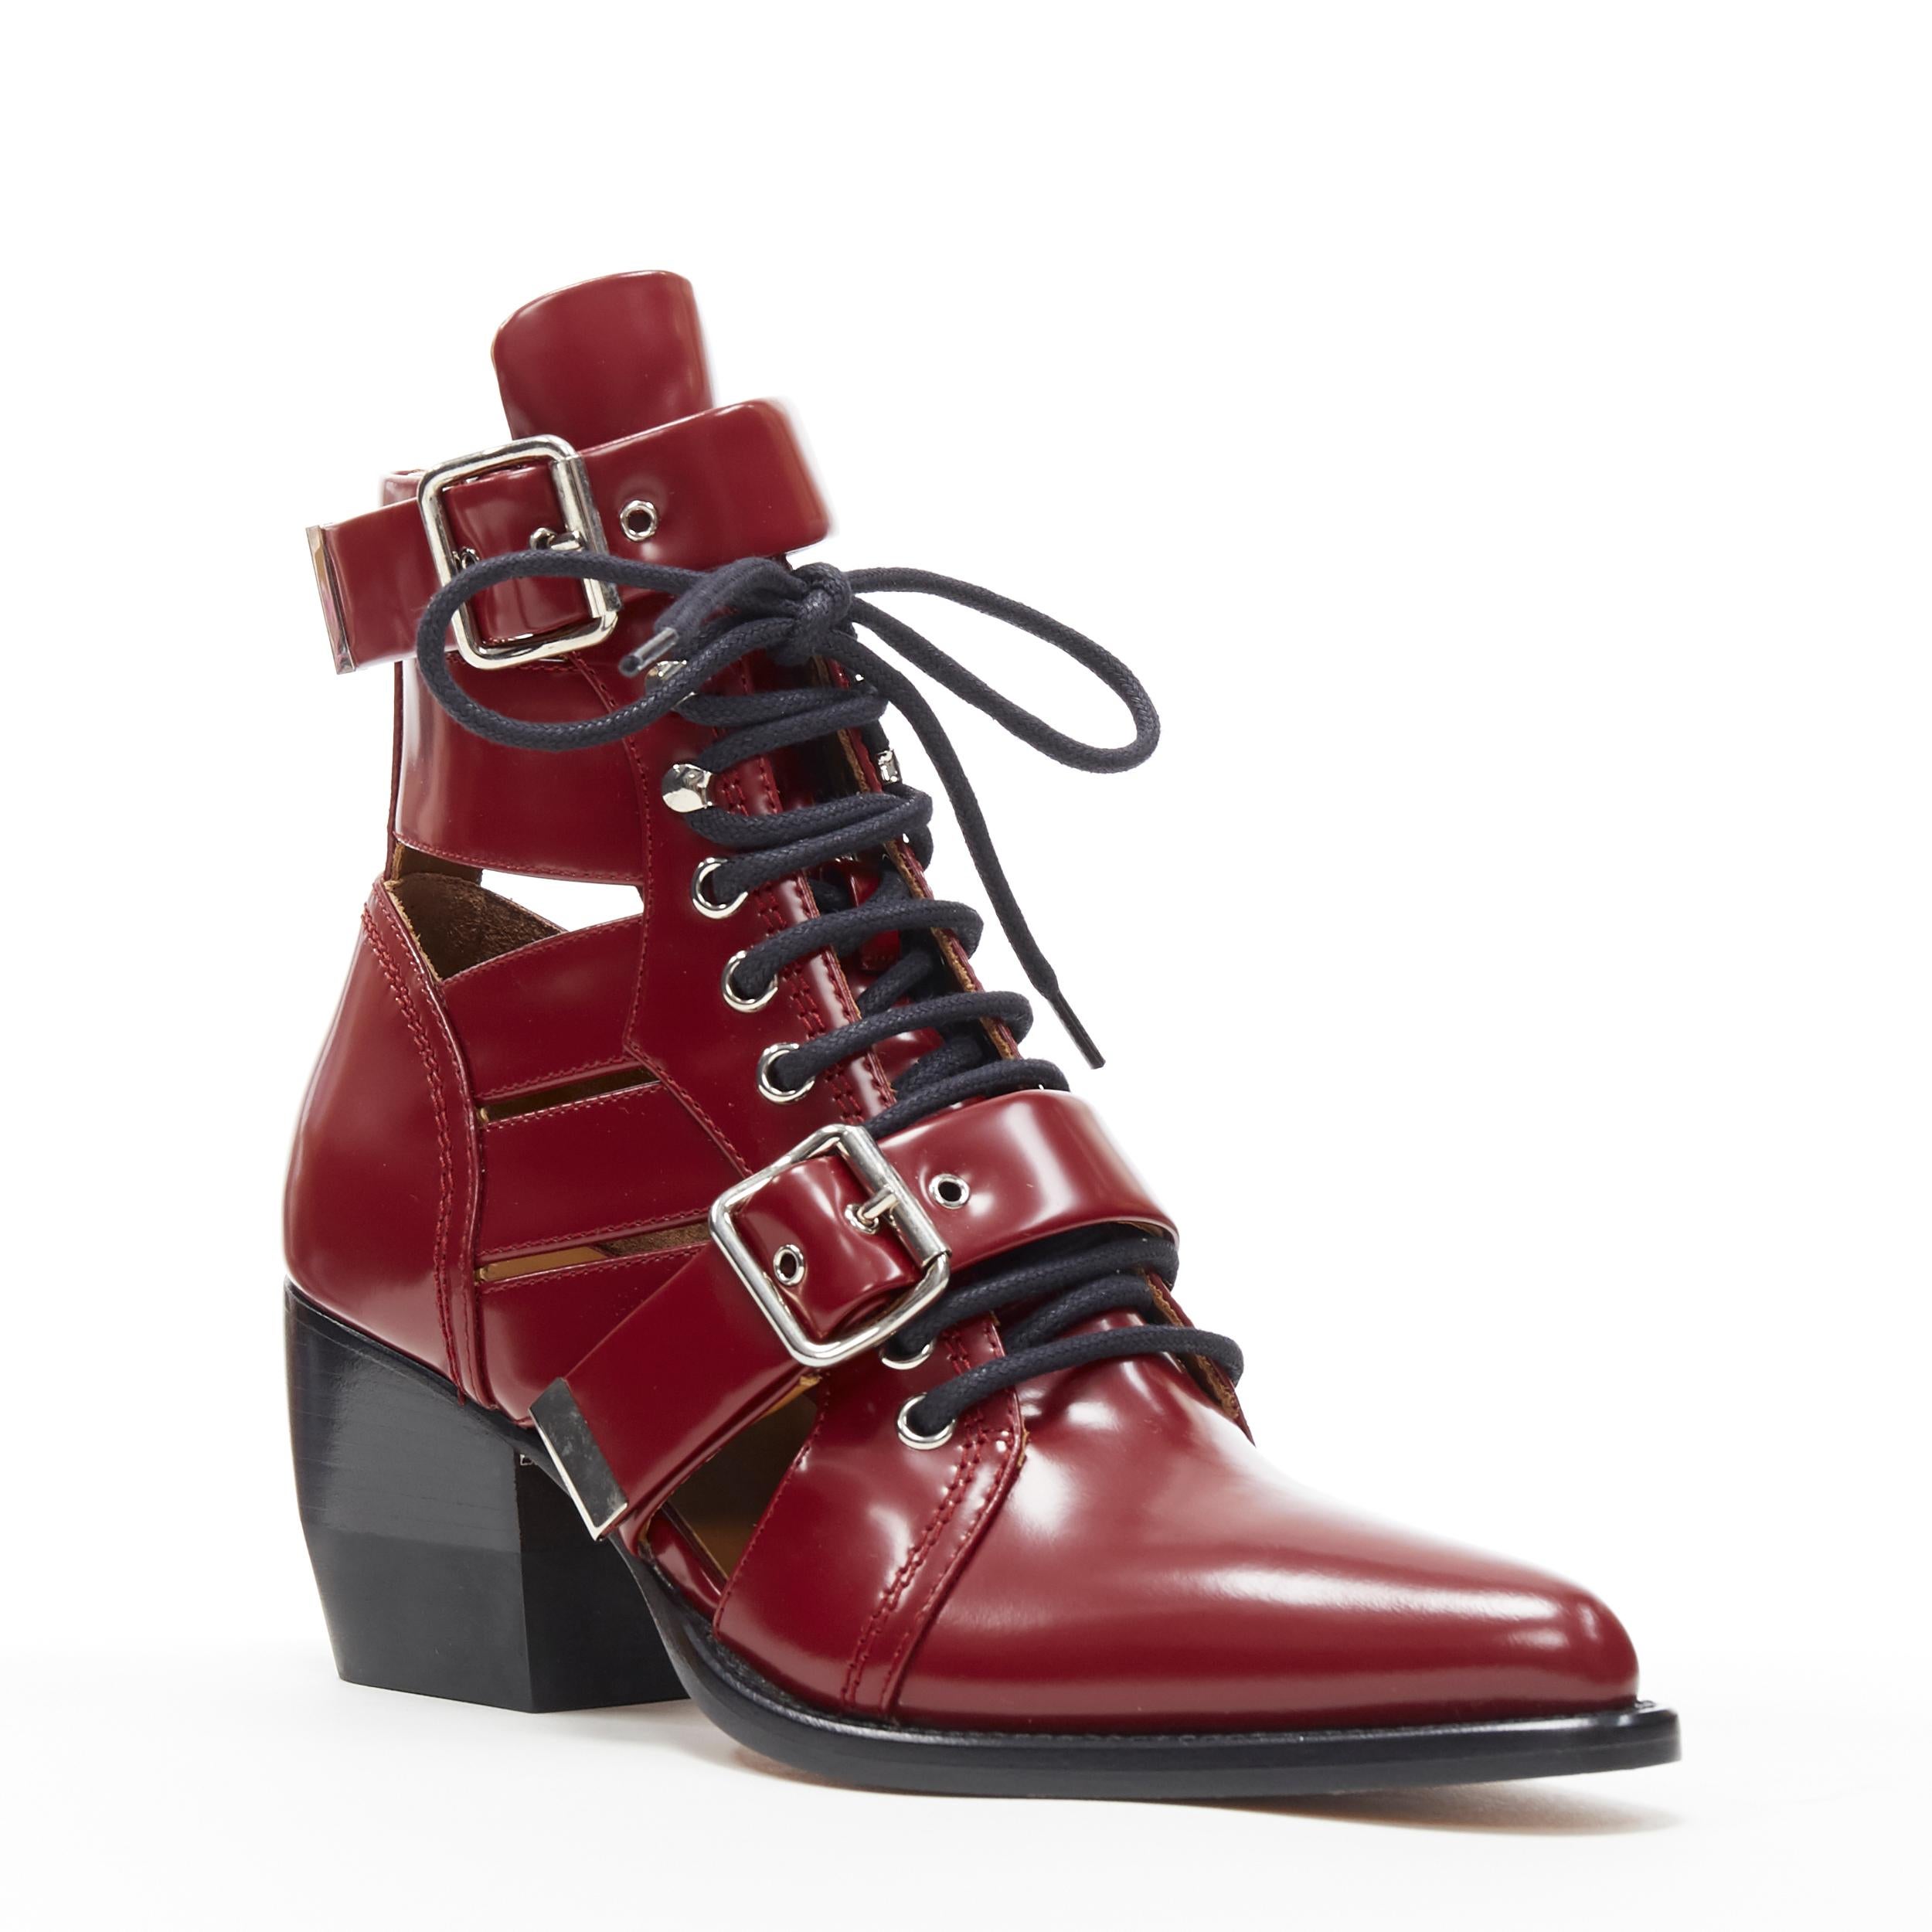 new CHLOE Rylee burgundy red leather cut out buckled pointy ankle boot EU37.5
Brand: Chloe
Model Name / Style: Rylee
Material: Leather
Color: Burgundy
Pattern: Solid
Closure: Lace up
Extra Detail: Signature Rylee boots by Chloe. Runway style. Ankle